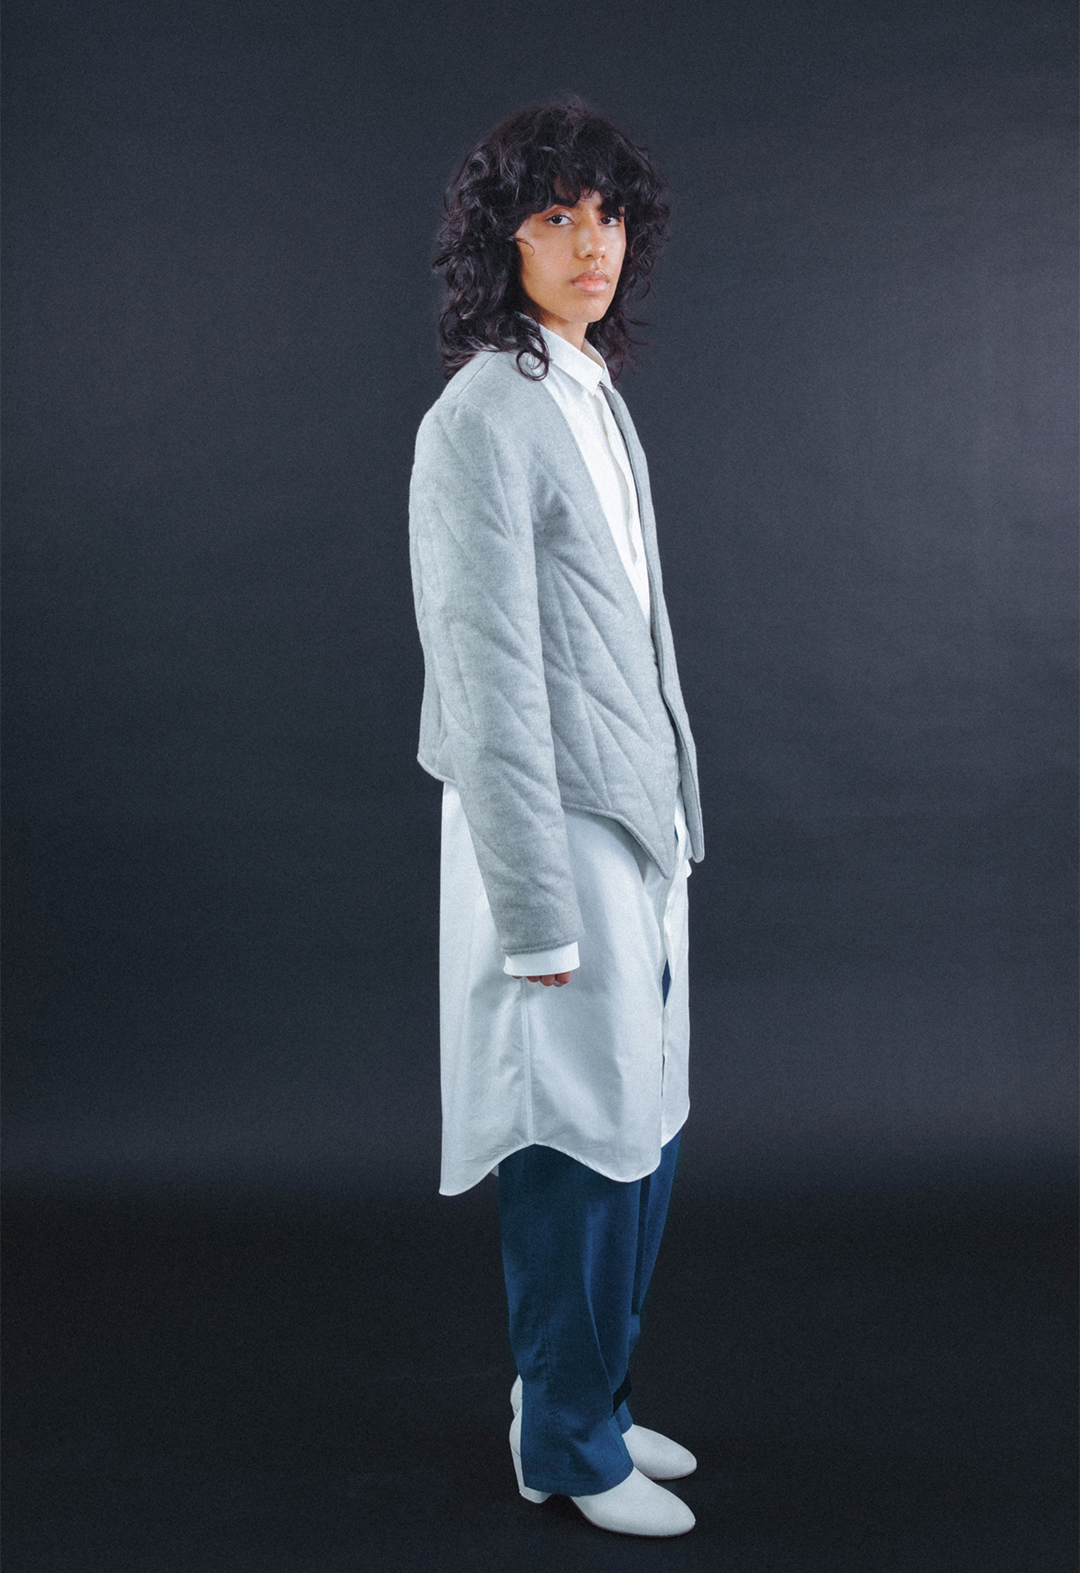 Photo of the model, Aria Puga, wearing a grey wool quilted jacket, a white cotton tunic shirt, and teal linen trousers. The model is turned to the side with their head turned towards the camera. The background is black.